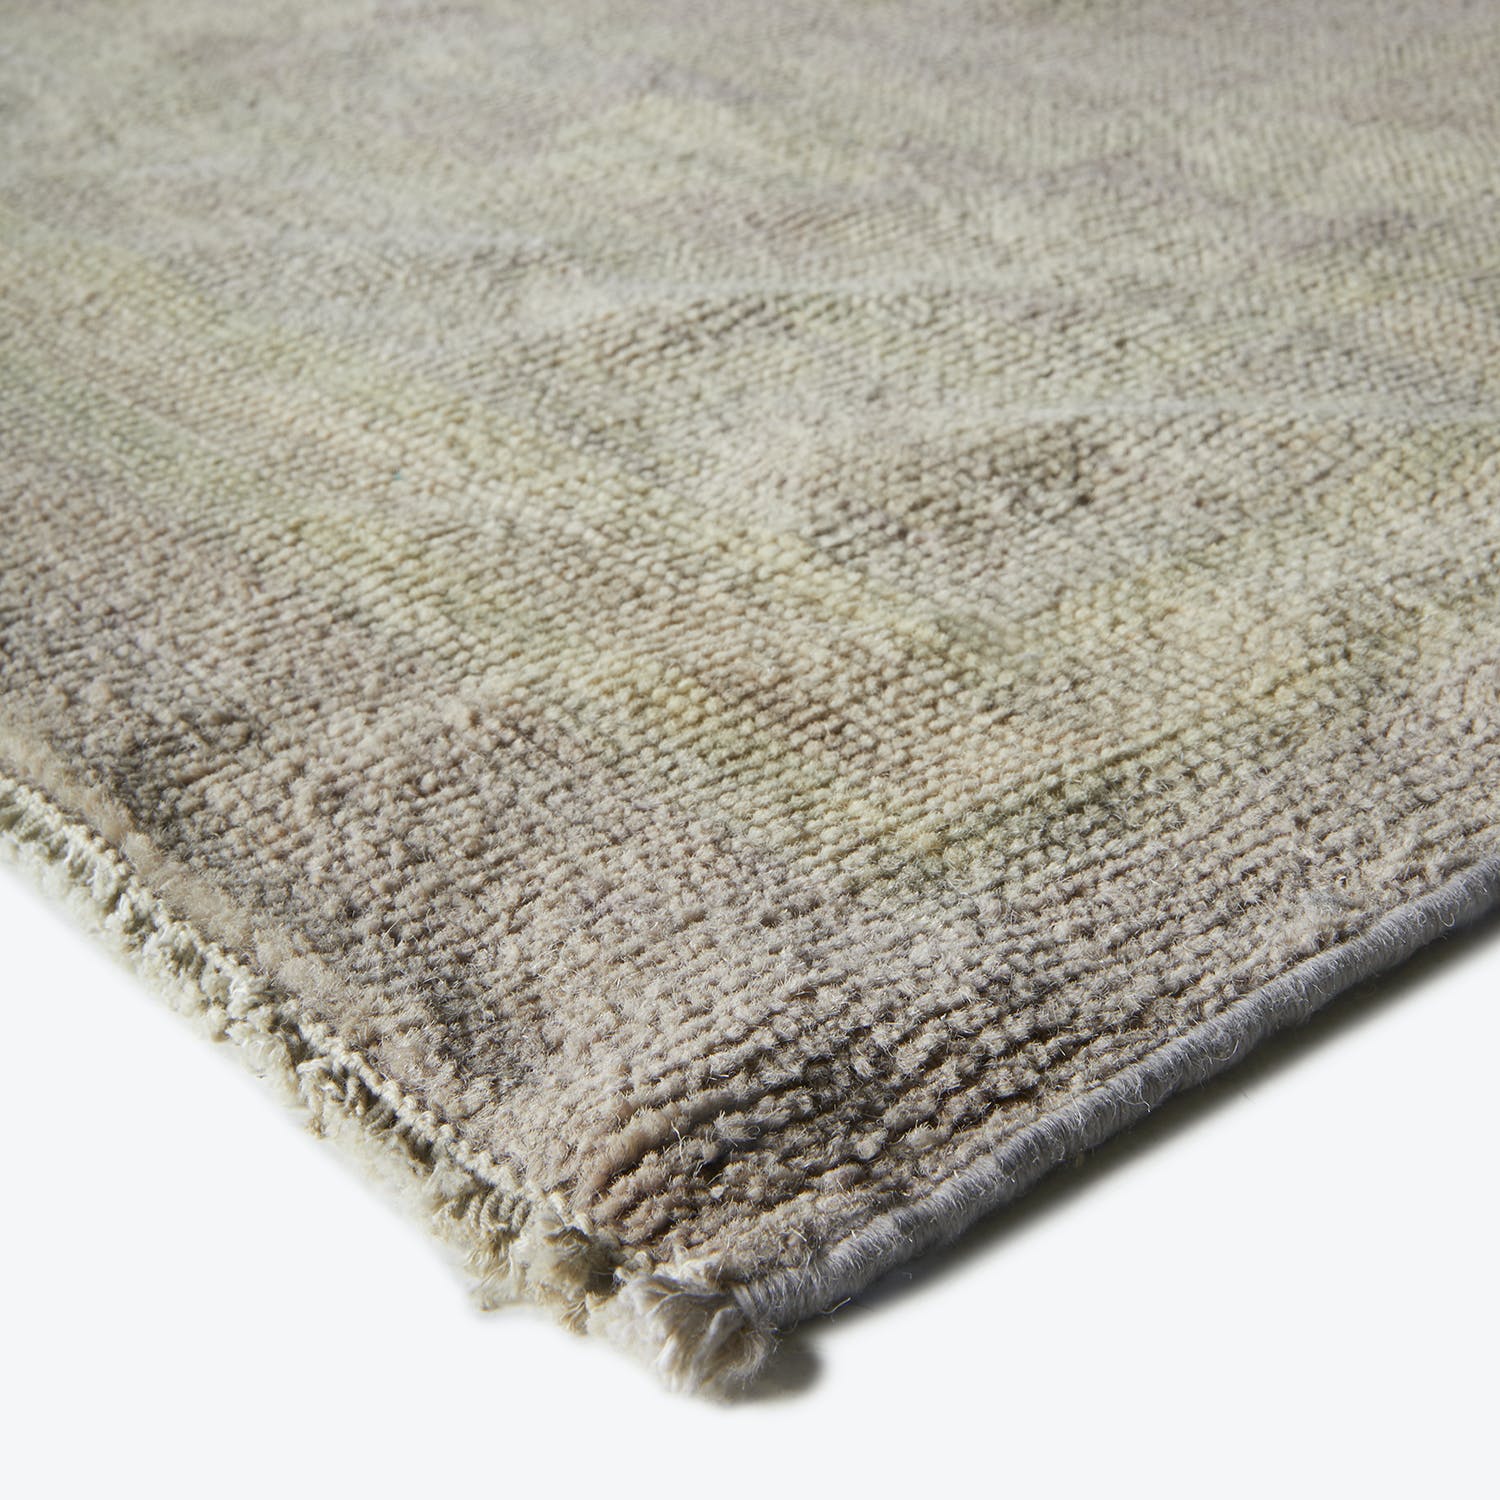 Top-down view of a plush, textured rug with muted hues.